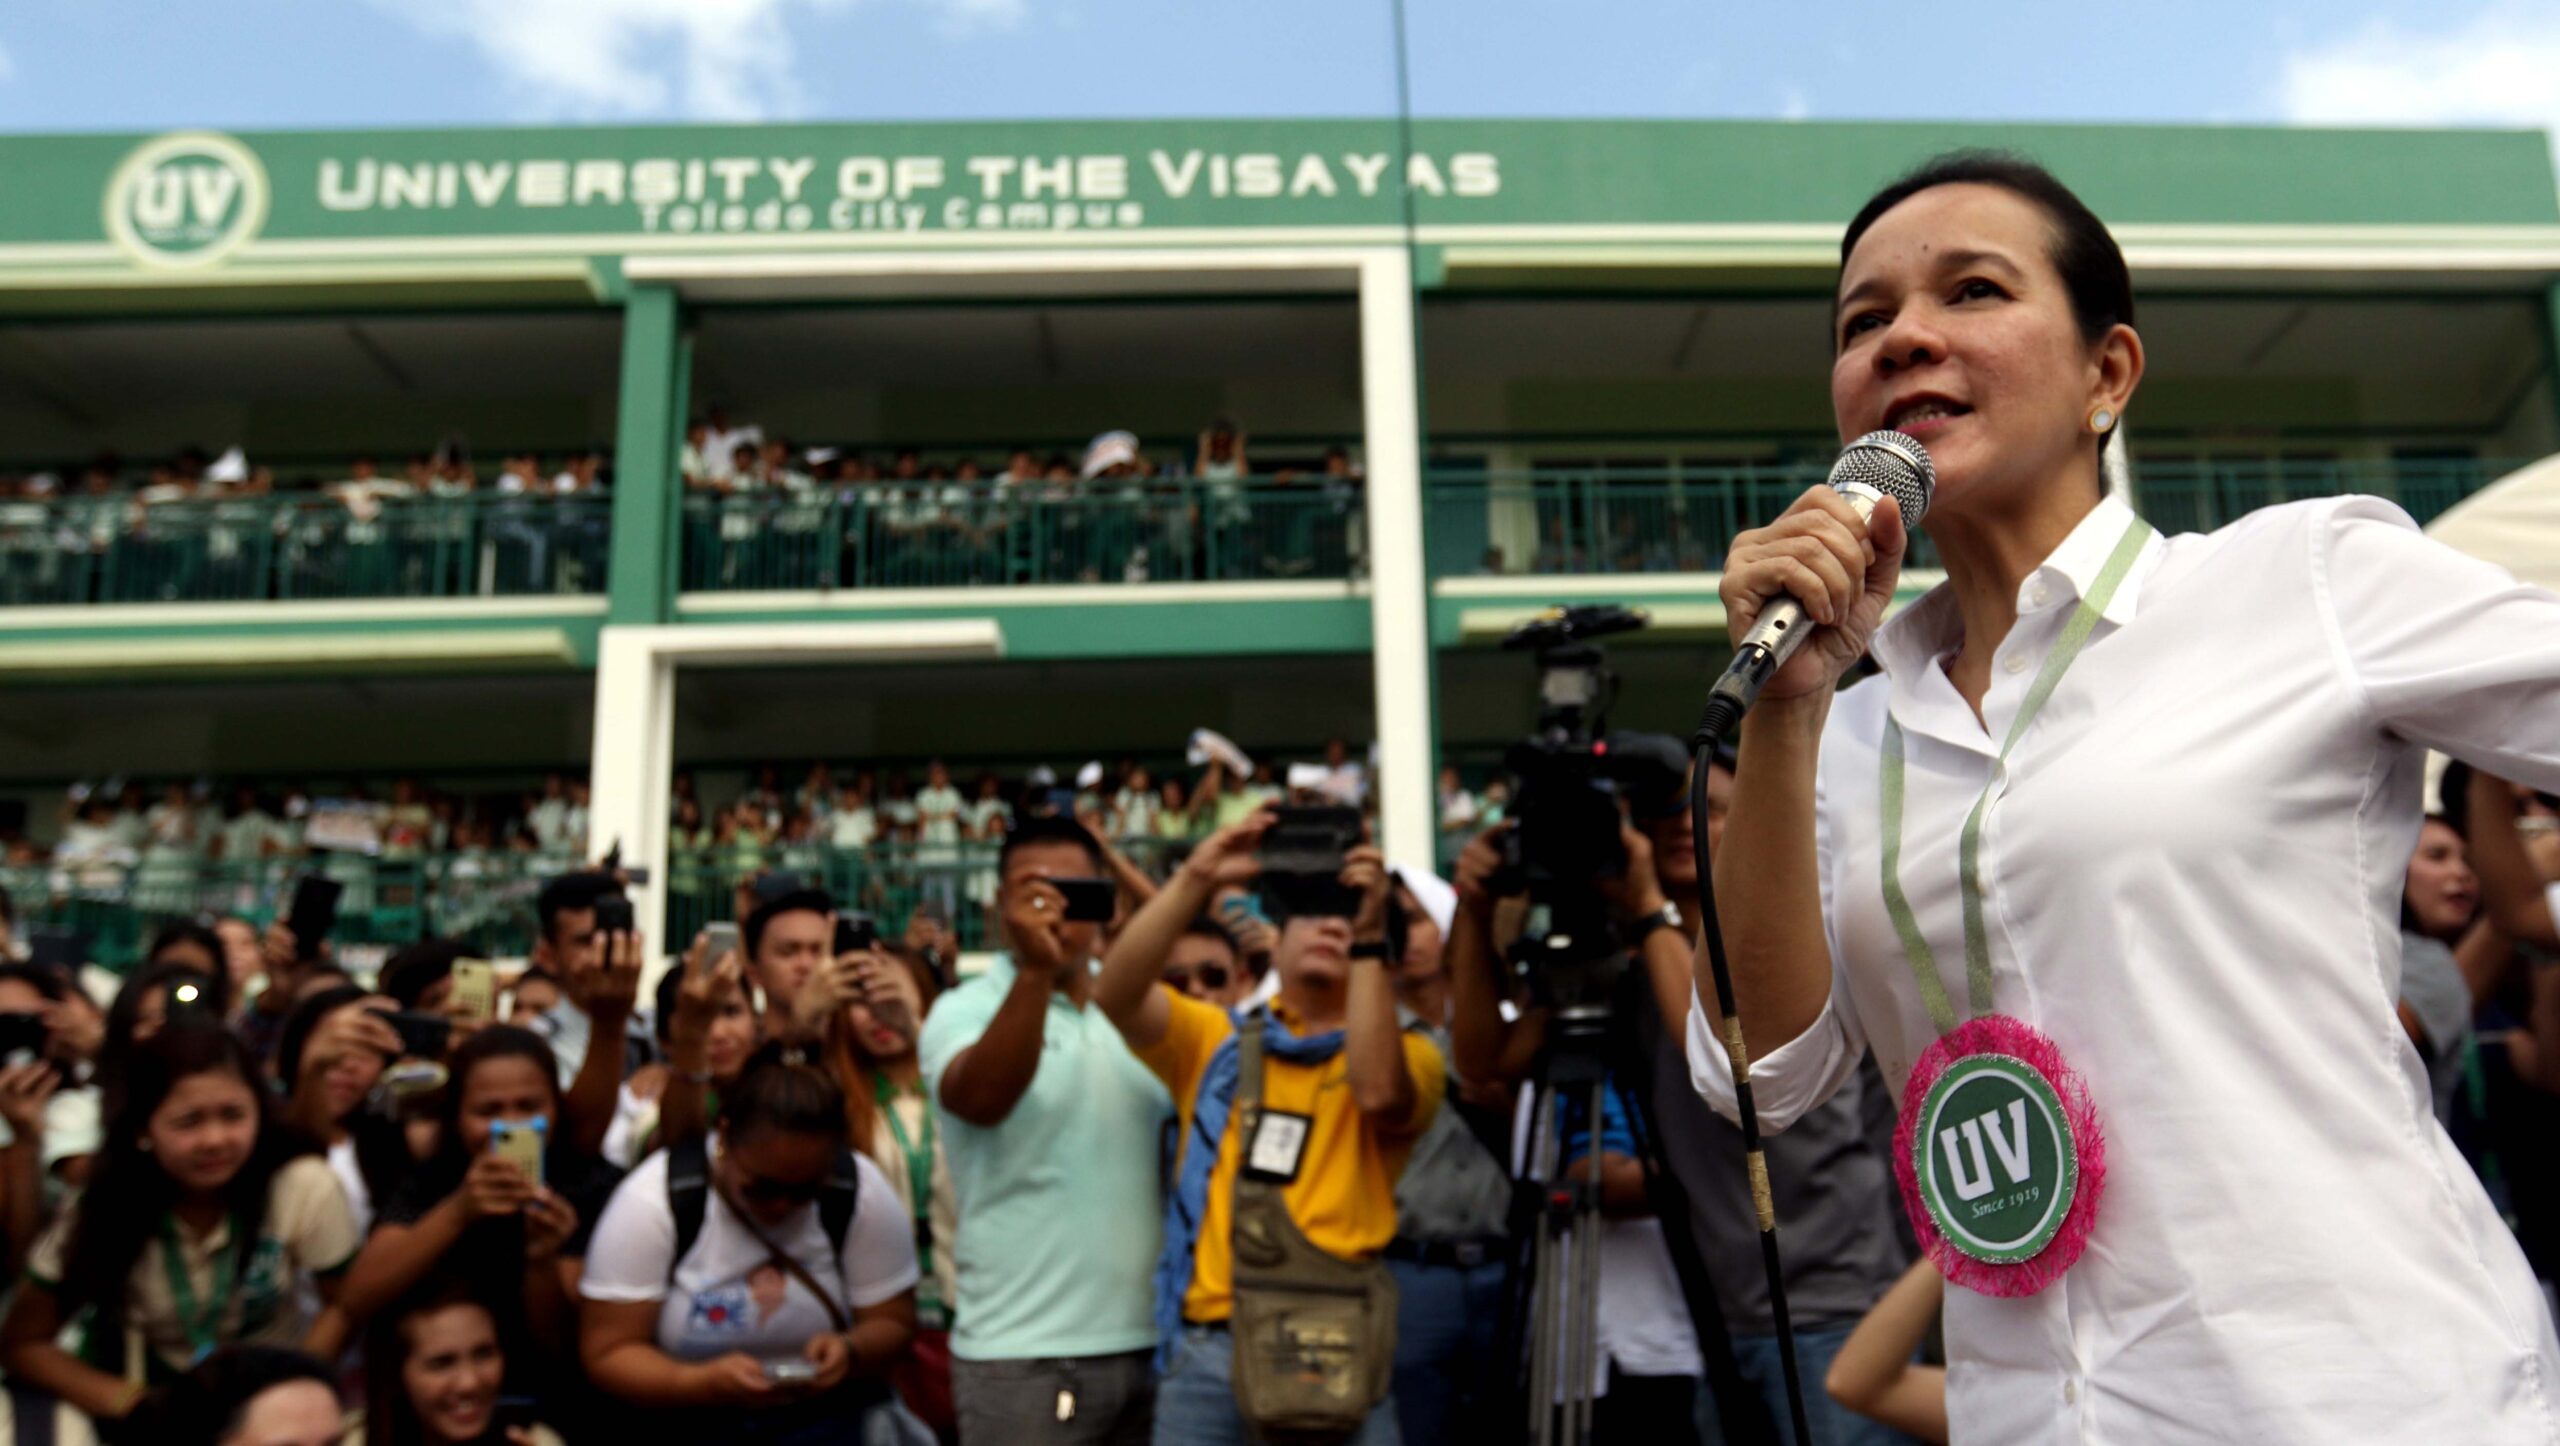 Anti-dynasty? Why do Poe, Escudero ask support from Cebu families?